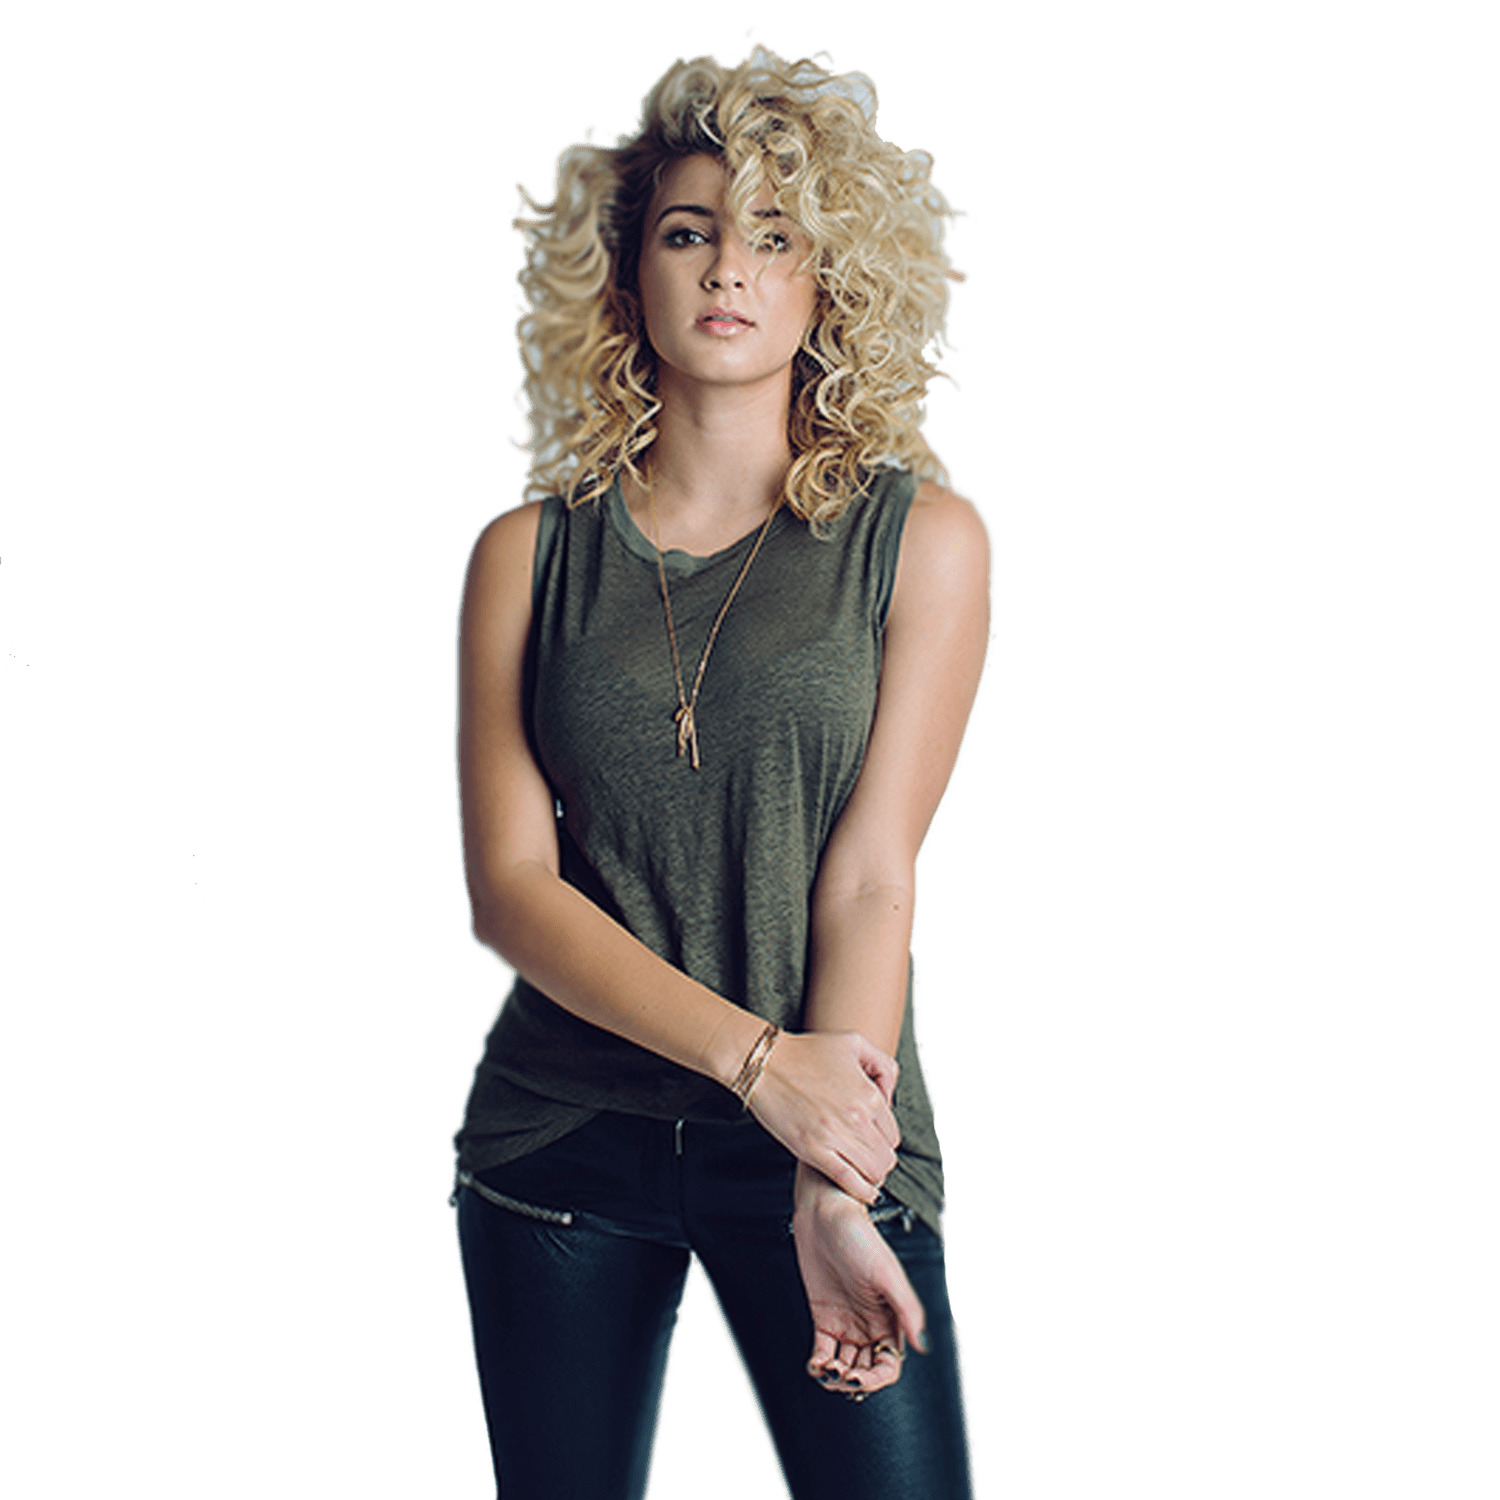 Tori Kelly Standing icons